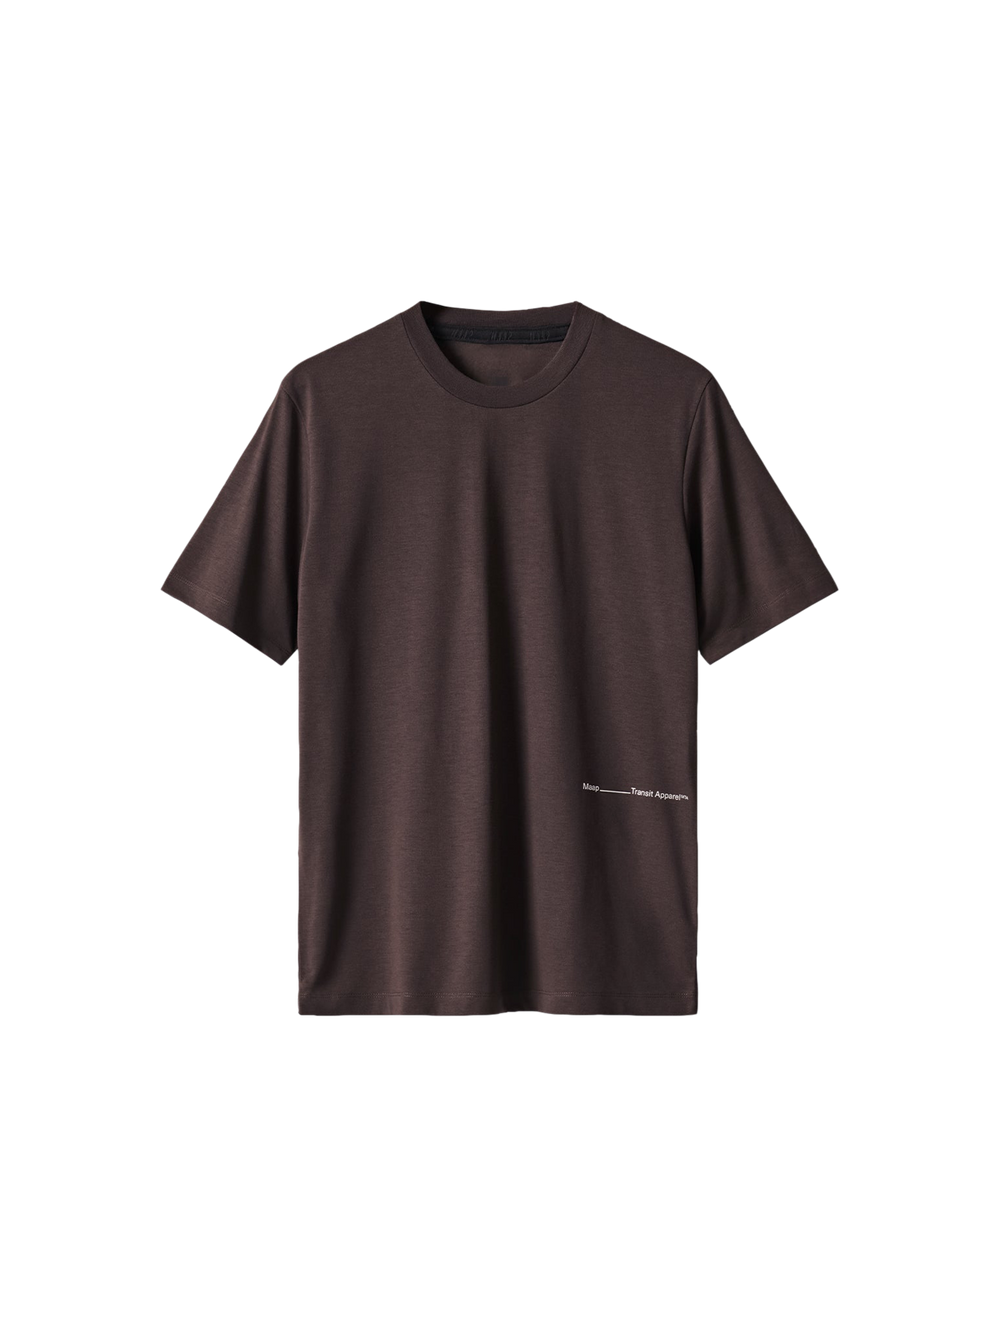 Product Image for Transit Tee